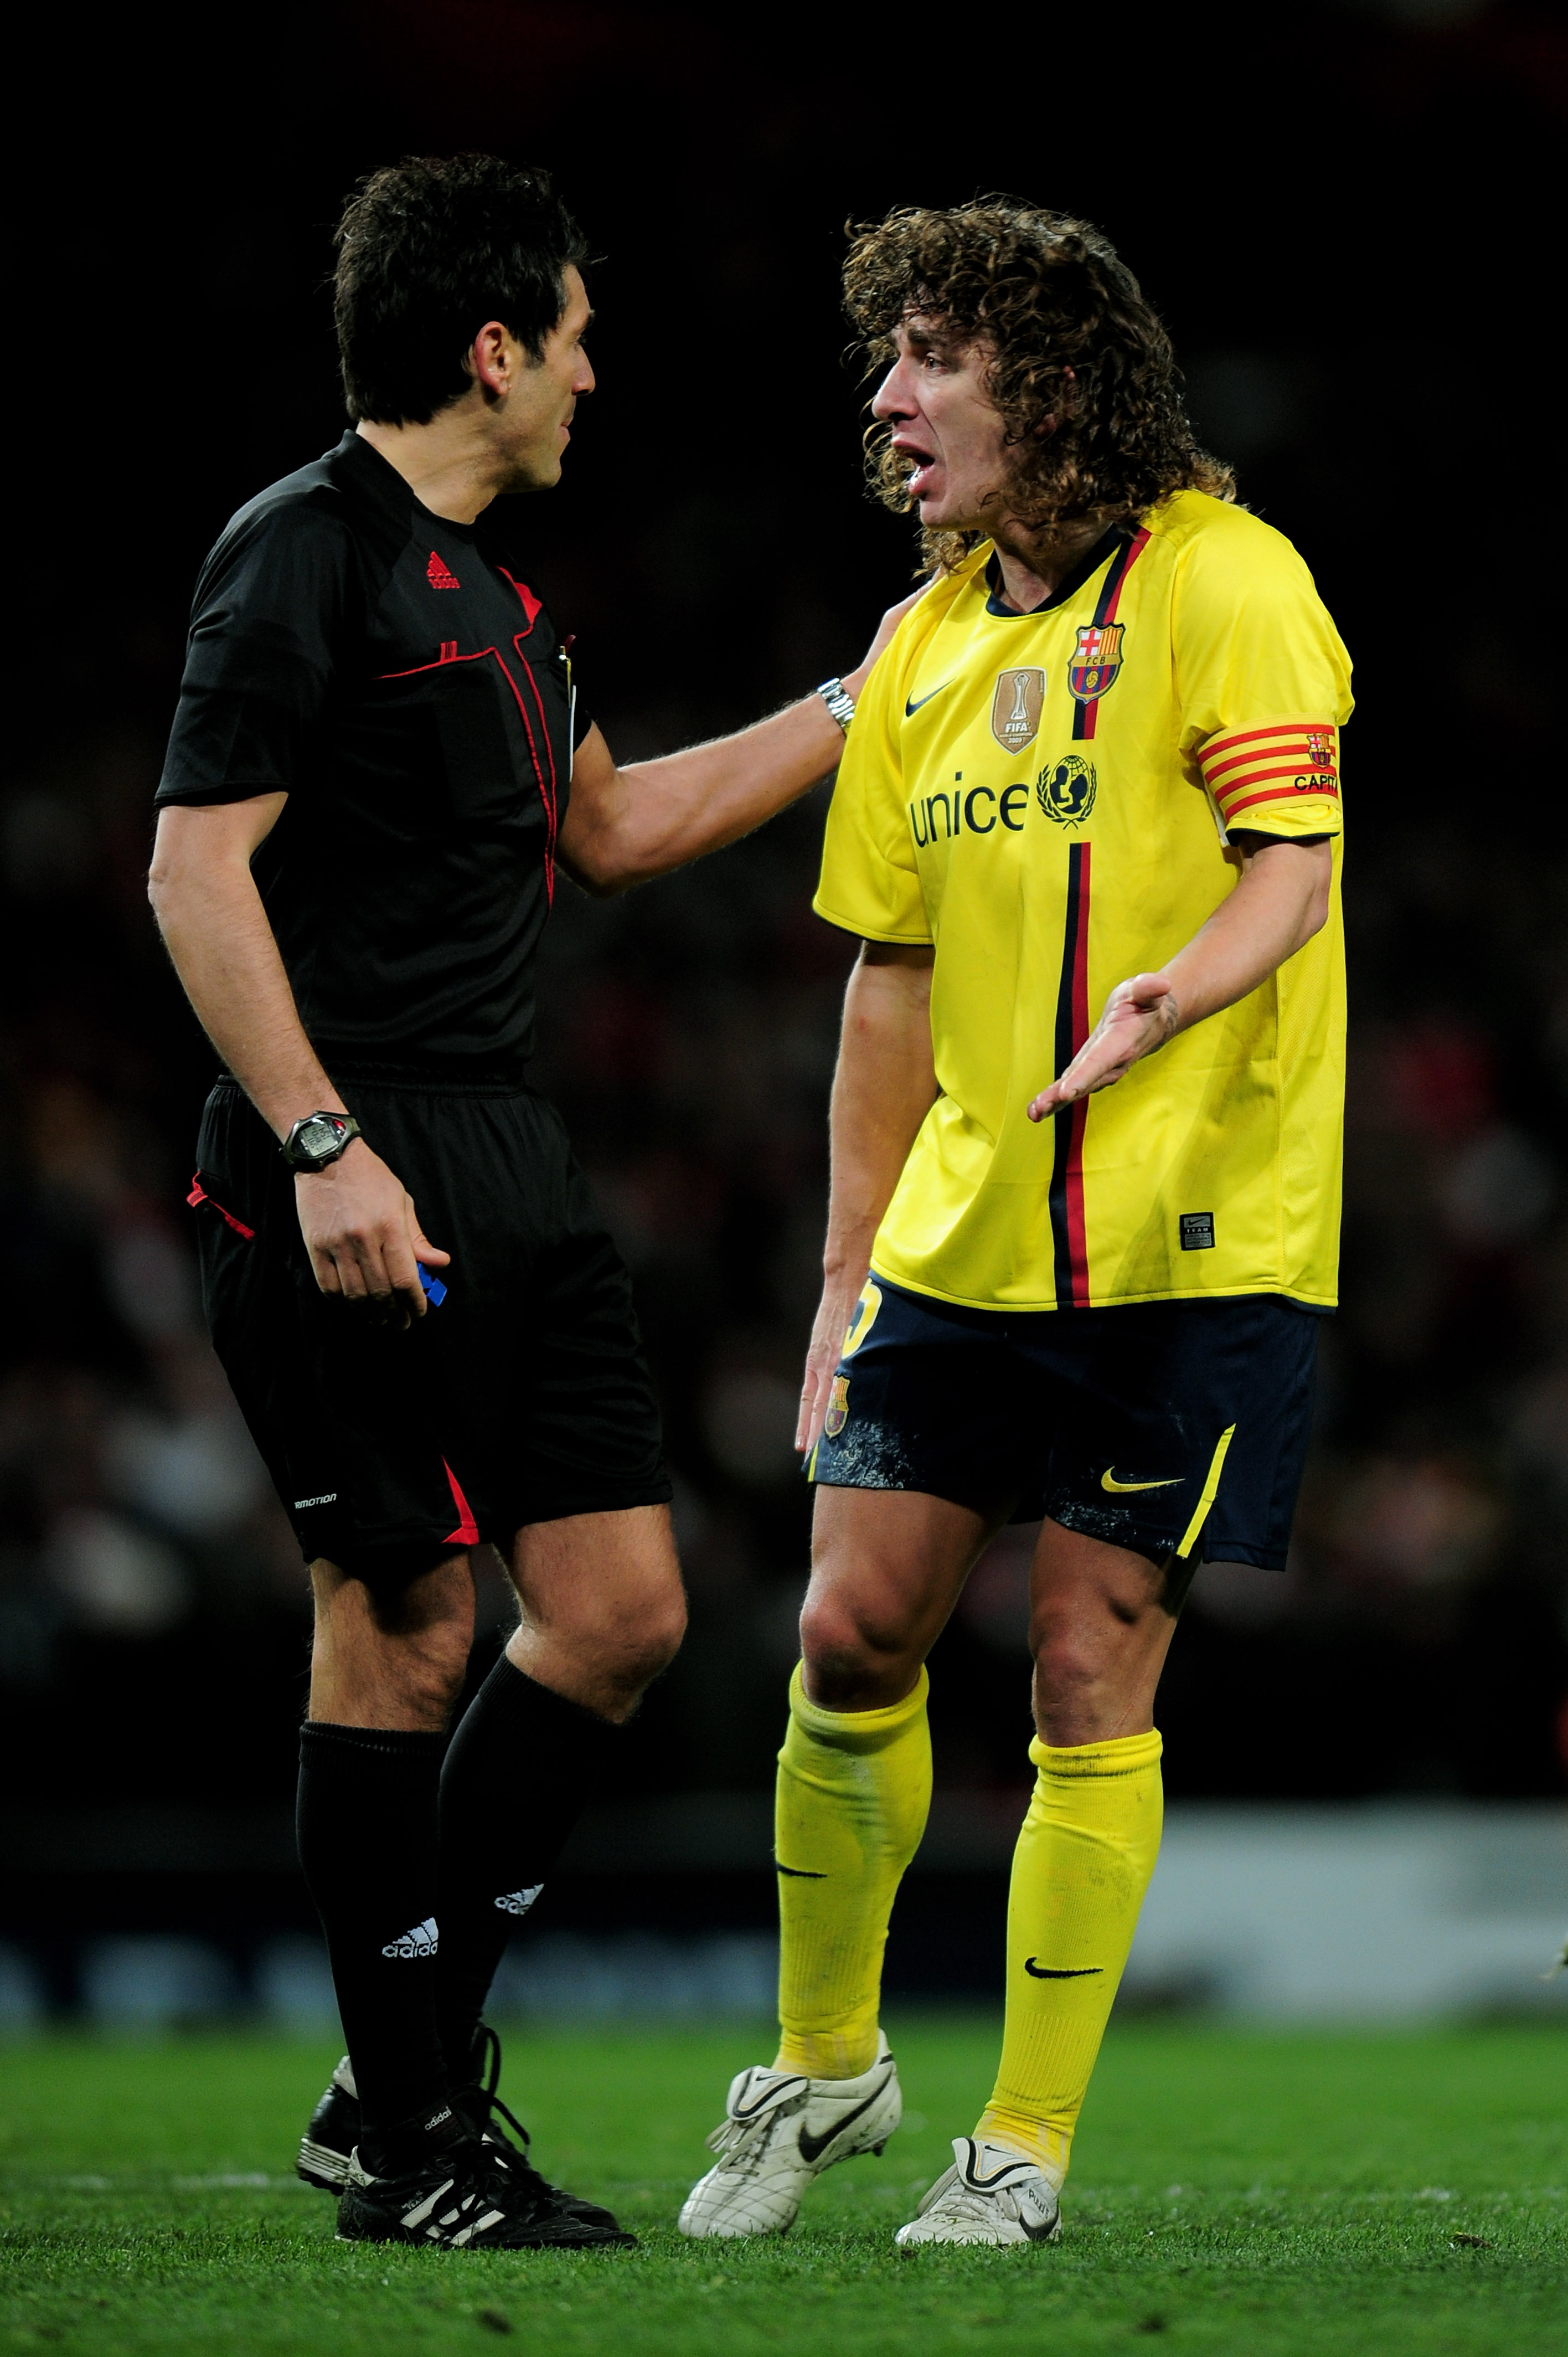 LONDON, ENGLAND - MARCH 31:  Carles Puyol (R) of Barcelona pleads with Referee Massimo Busacca of Switzerland after being shown the red card for bringing down Cesc Fabregas of Arsenal for a penalty during the UEFA Champions League quarter final first leg